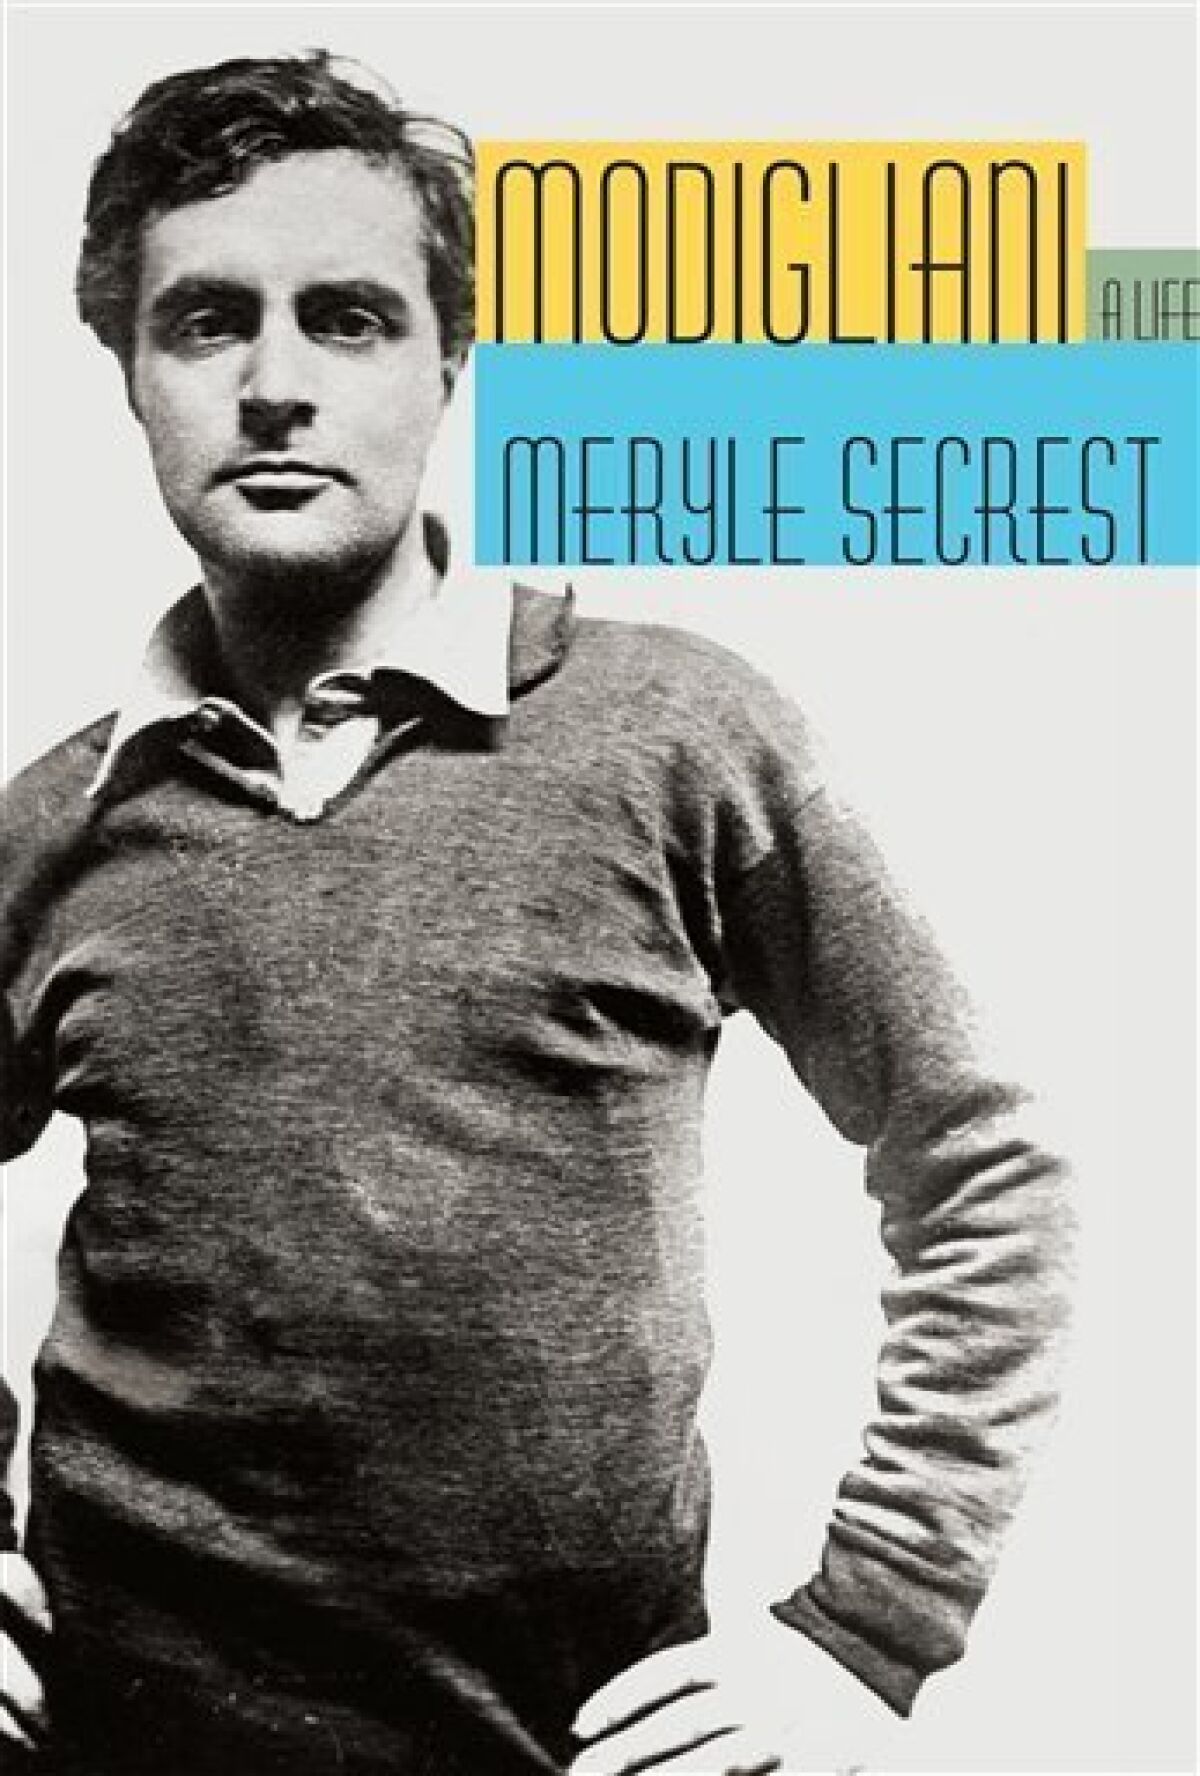 In this book cover image released by Alfred A. Knopf, "Modigliani: A Life" by Meryle Secrest is shown. (AP Photo/Alfred A. Knopf)